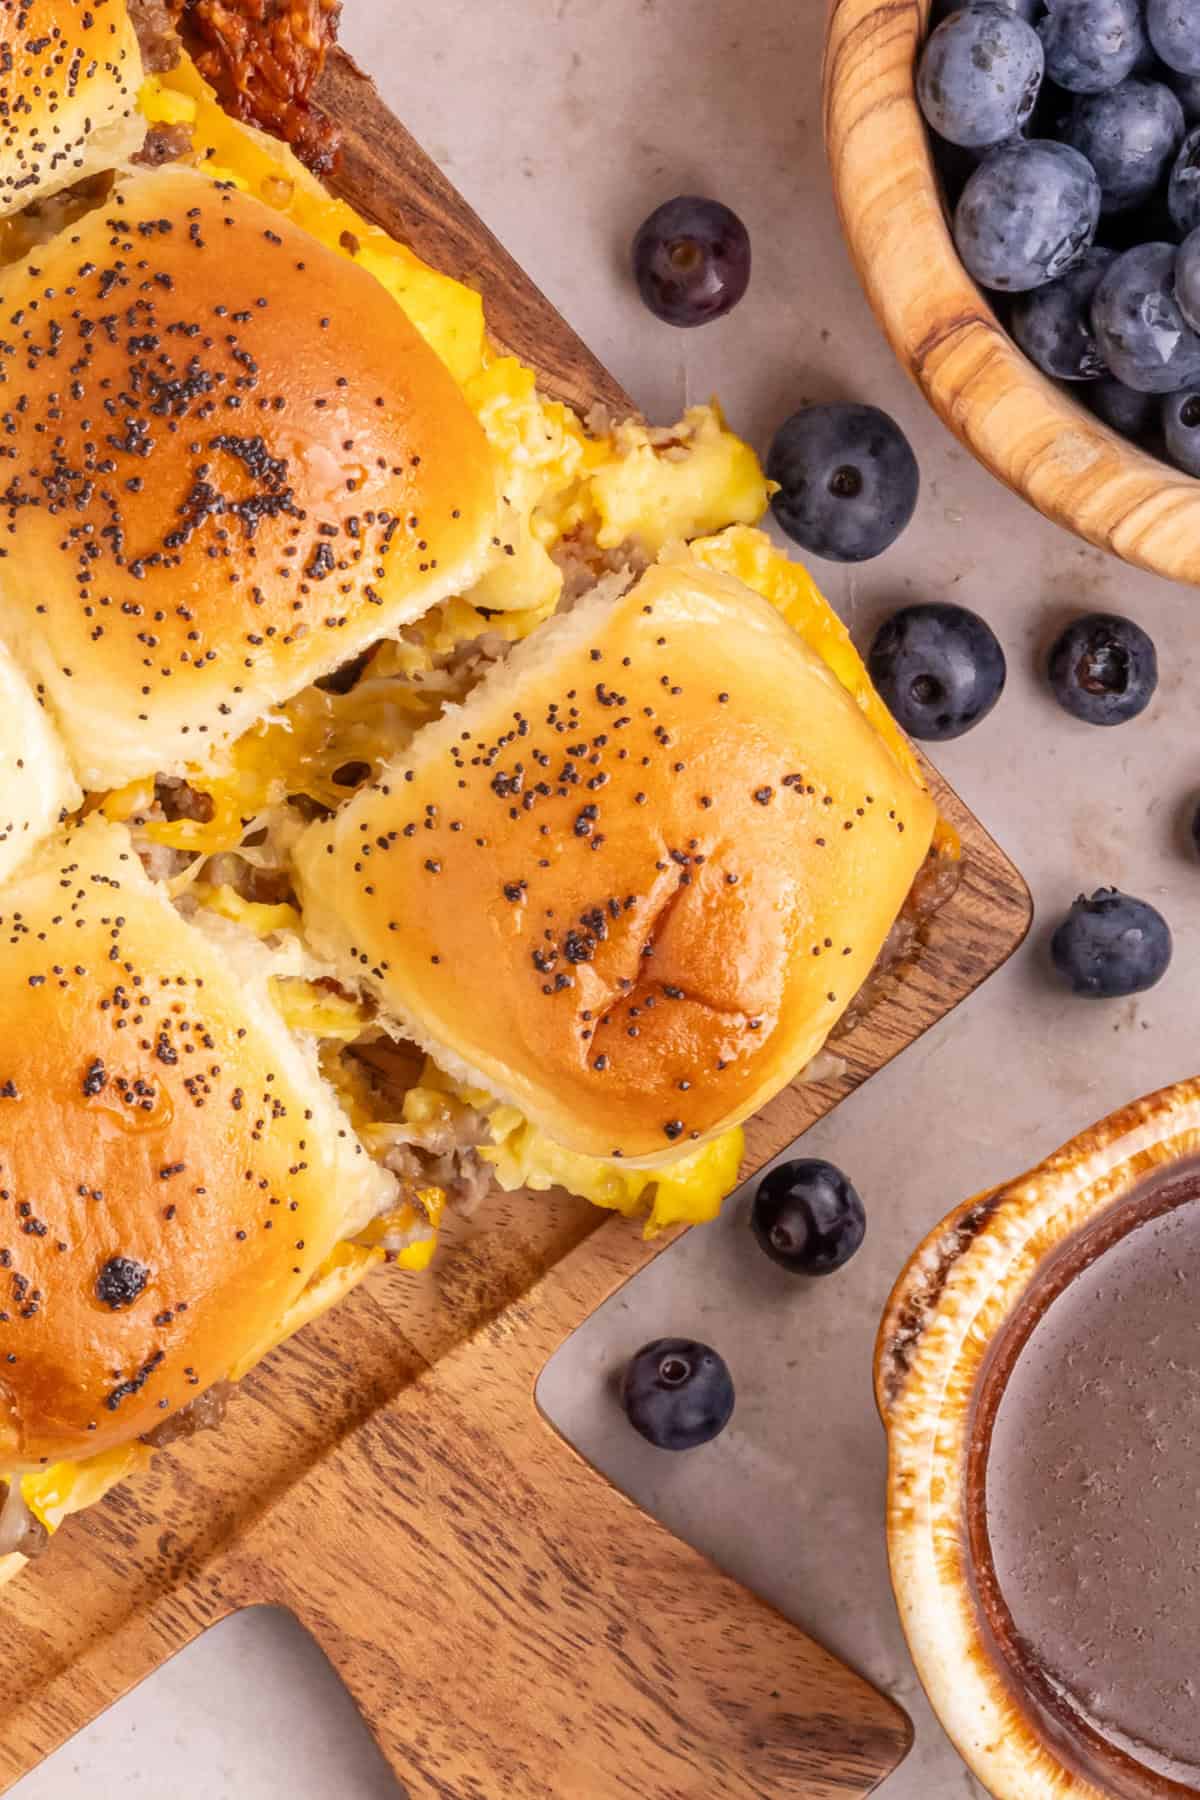 King's Hawaiian Breakfast Sliders with scrambled eggs, ground sausage, and cheese. Blueberries are served on the side.